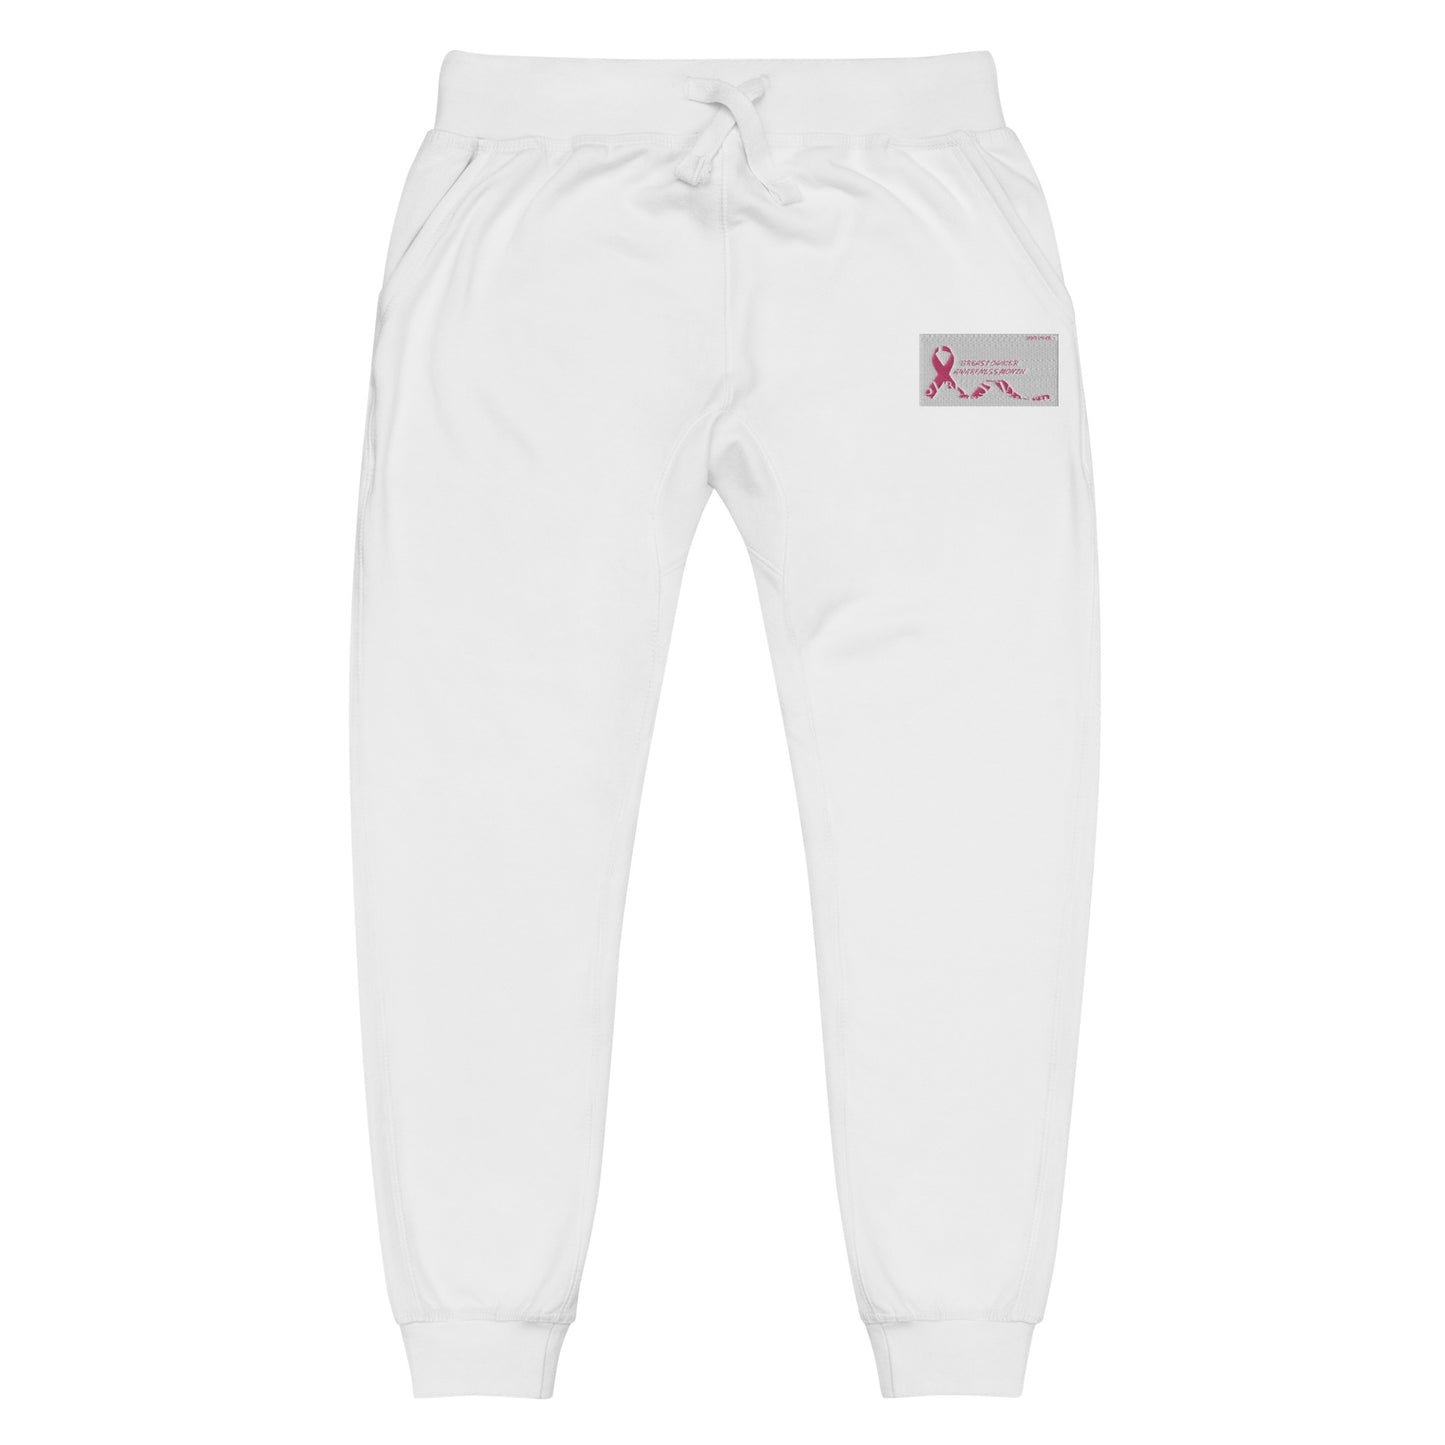 Women’s Breast Cancer Awareness Month Joggers